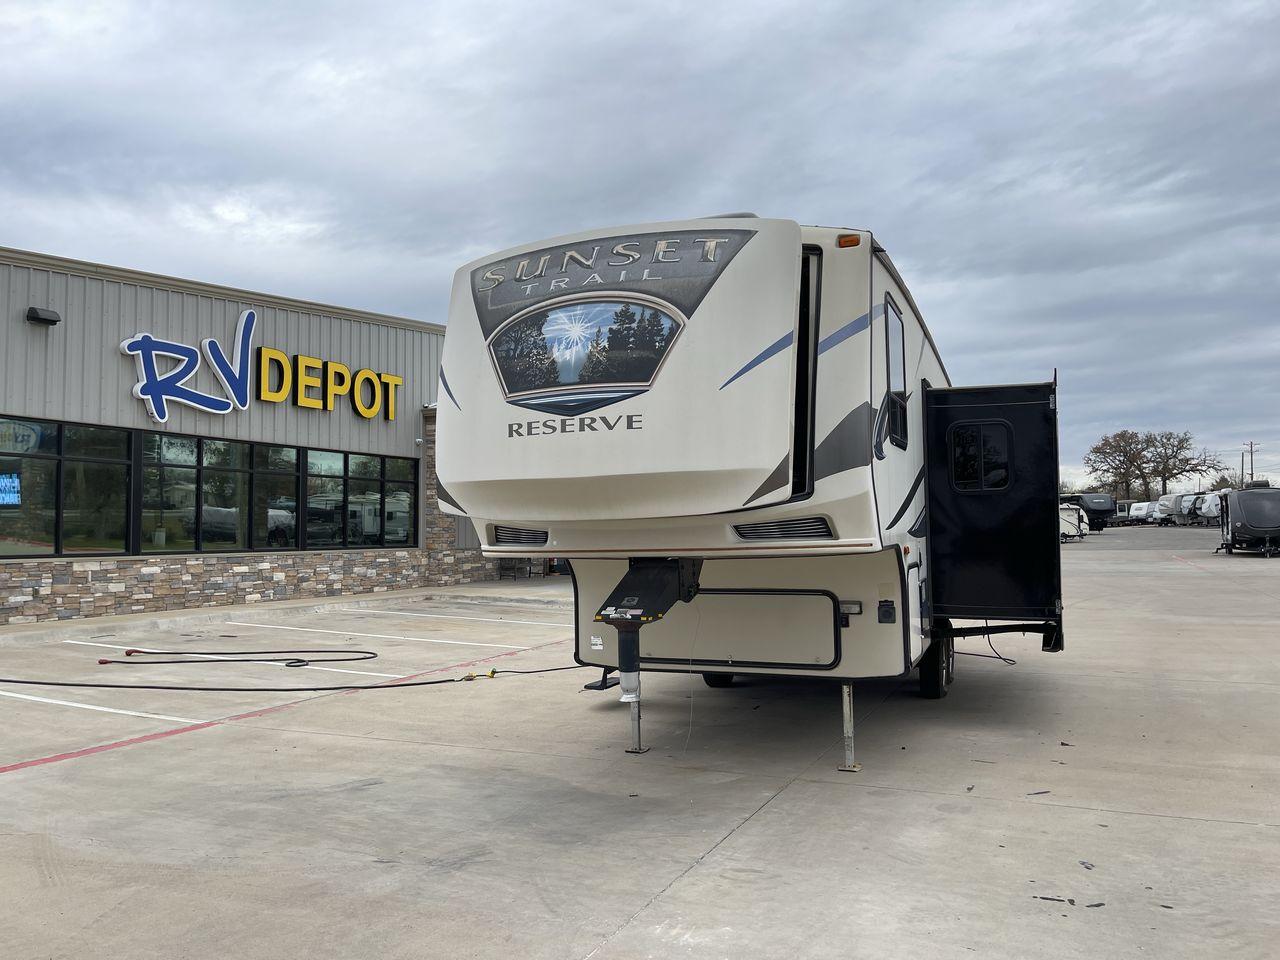 2015 CROSSROADS SUNSET TRAIL RESERVE (4V0FC2624FB) , Length: 30.17 ft | Dry Weight: 6,401 lbs | Gross Weight: 9,542 lbs | Slides: 2 transmission, located at 4319 N Main St, Cleburne, TX, 76033, (817) 678-5133, 32.385960, -97.391212 - This model has the right mix of space and maneuverability, with a length of 30 feet and a dry weight of 6,401 pounds. With a strong aluminum frame and fiberglass sidewalls, it will last for a long time on the road, making it a great choice for travelers who want both style and dependability. The Sun - Photo #0